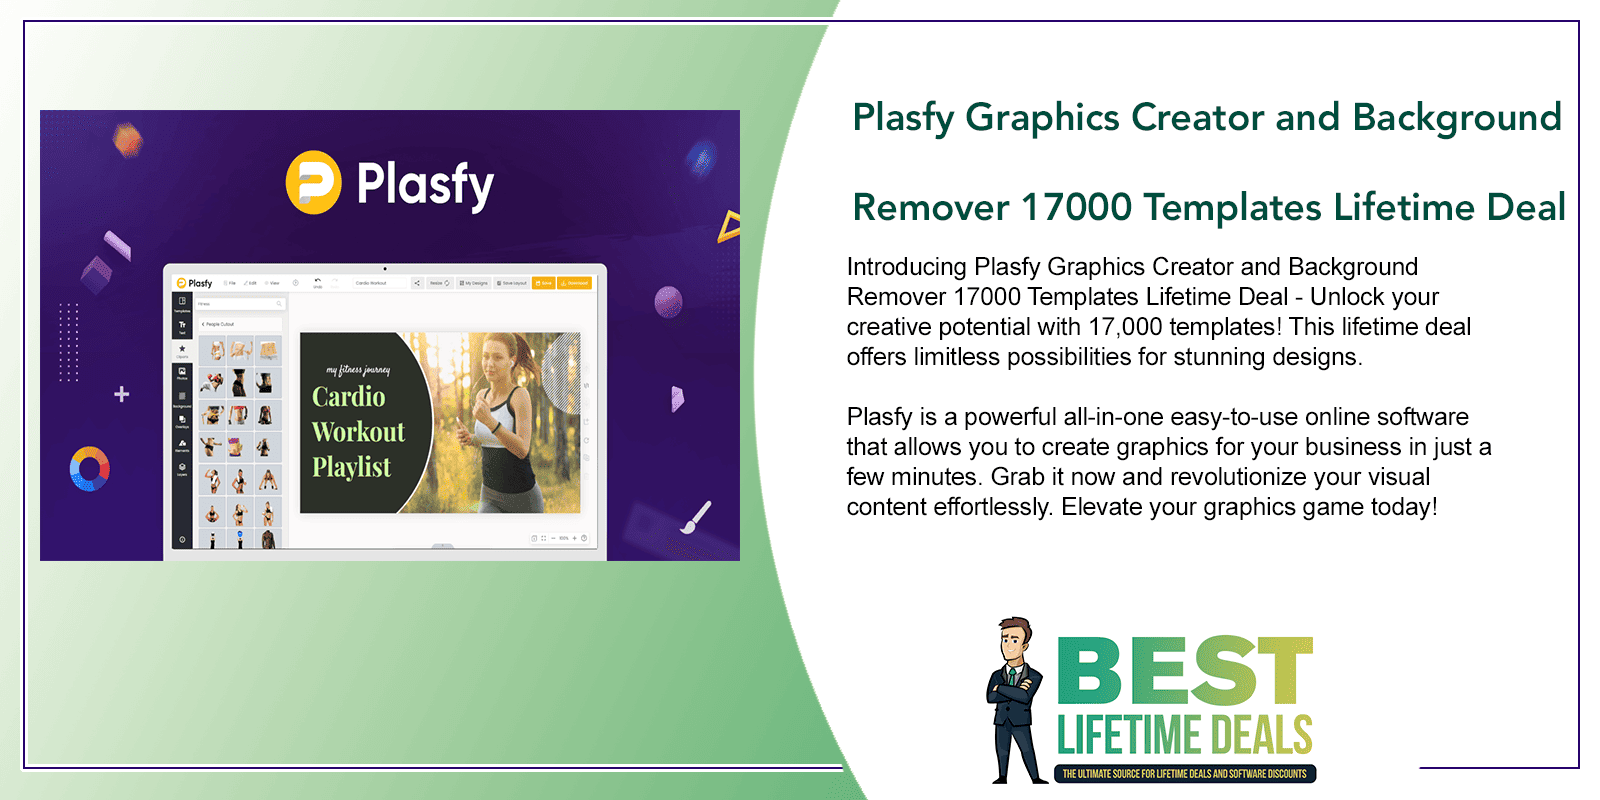 Plasfy Graphics Creator and Background Remover 17000 Templates Lifetime Deal Featured Image